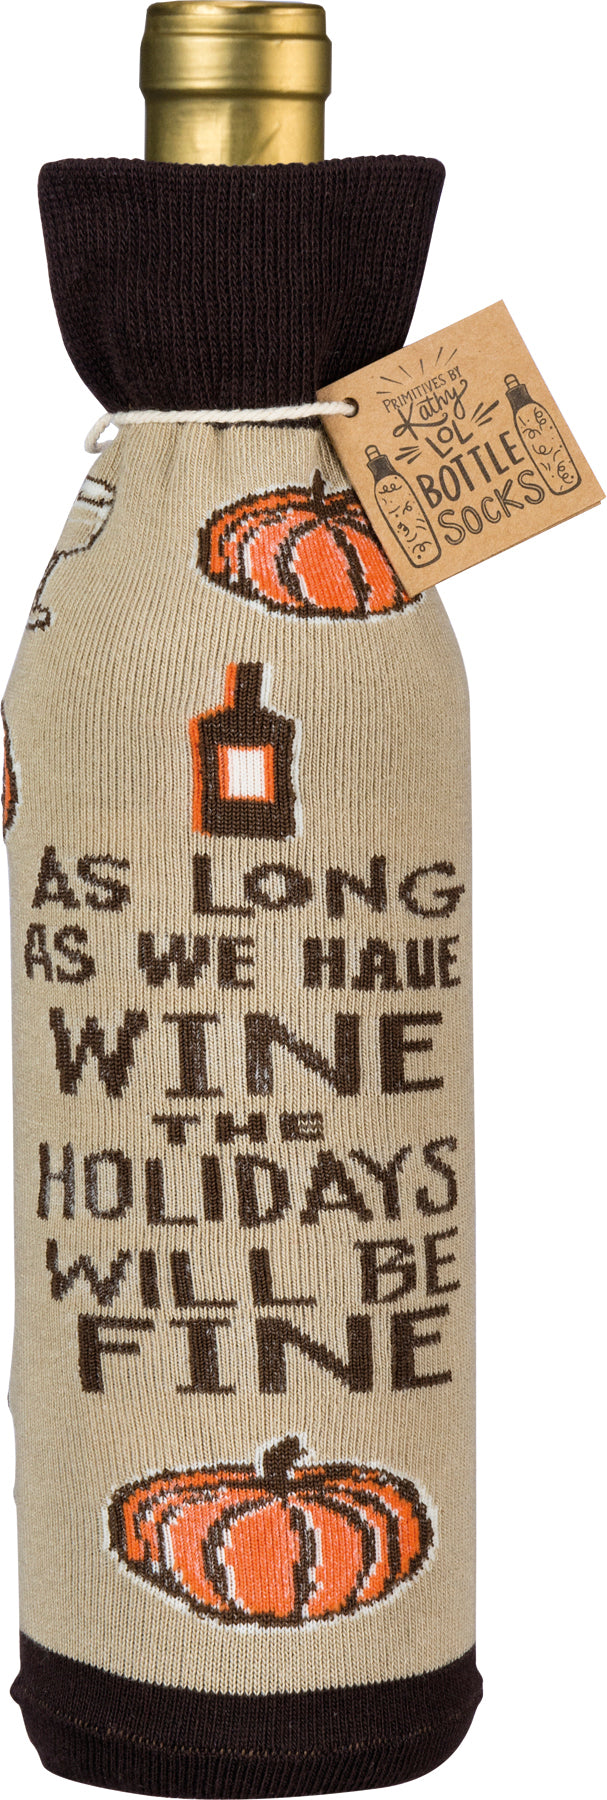 Bottle Sock 'Have Wine, Holidays Will Be Fine'